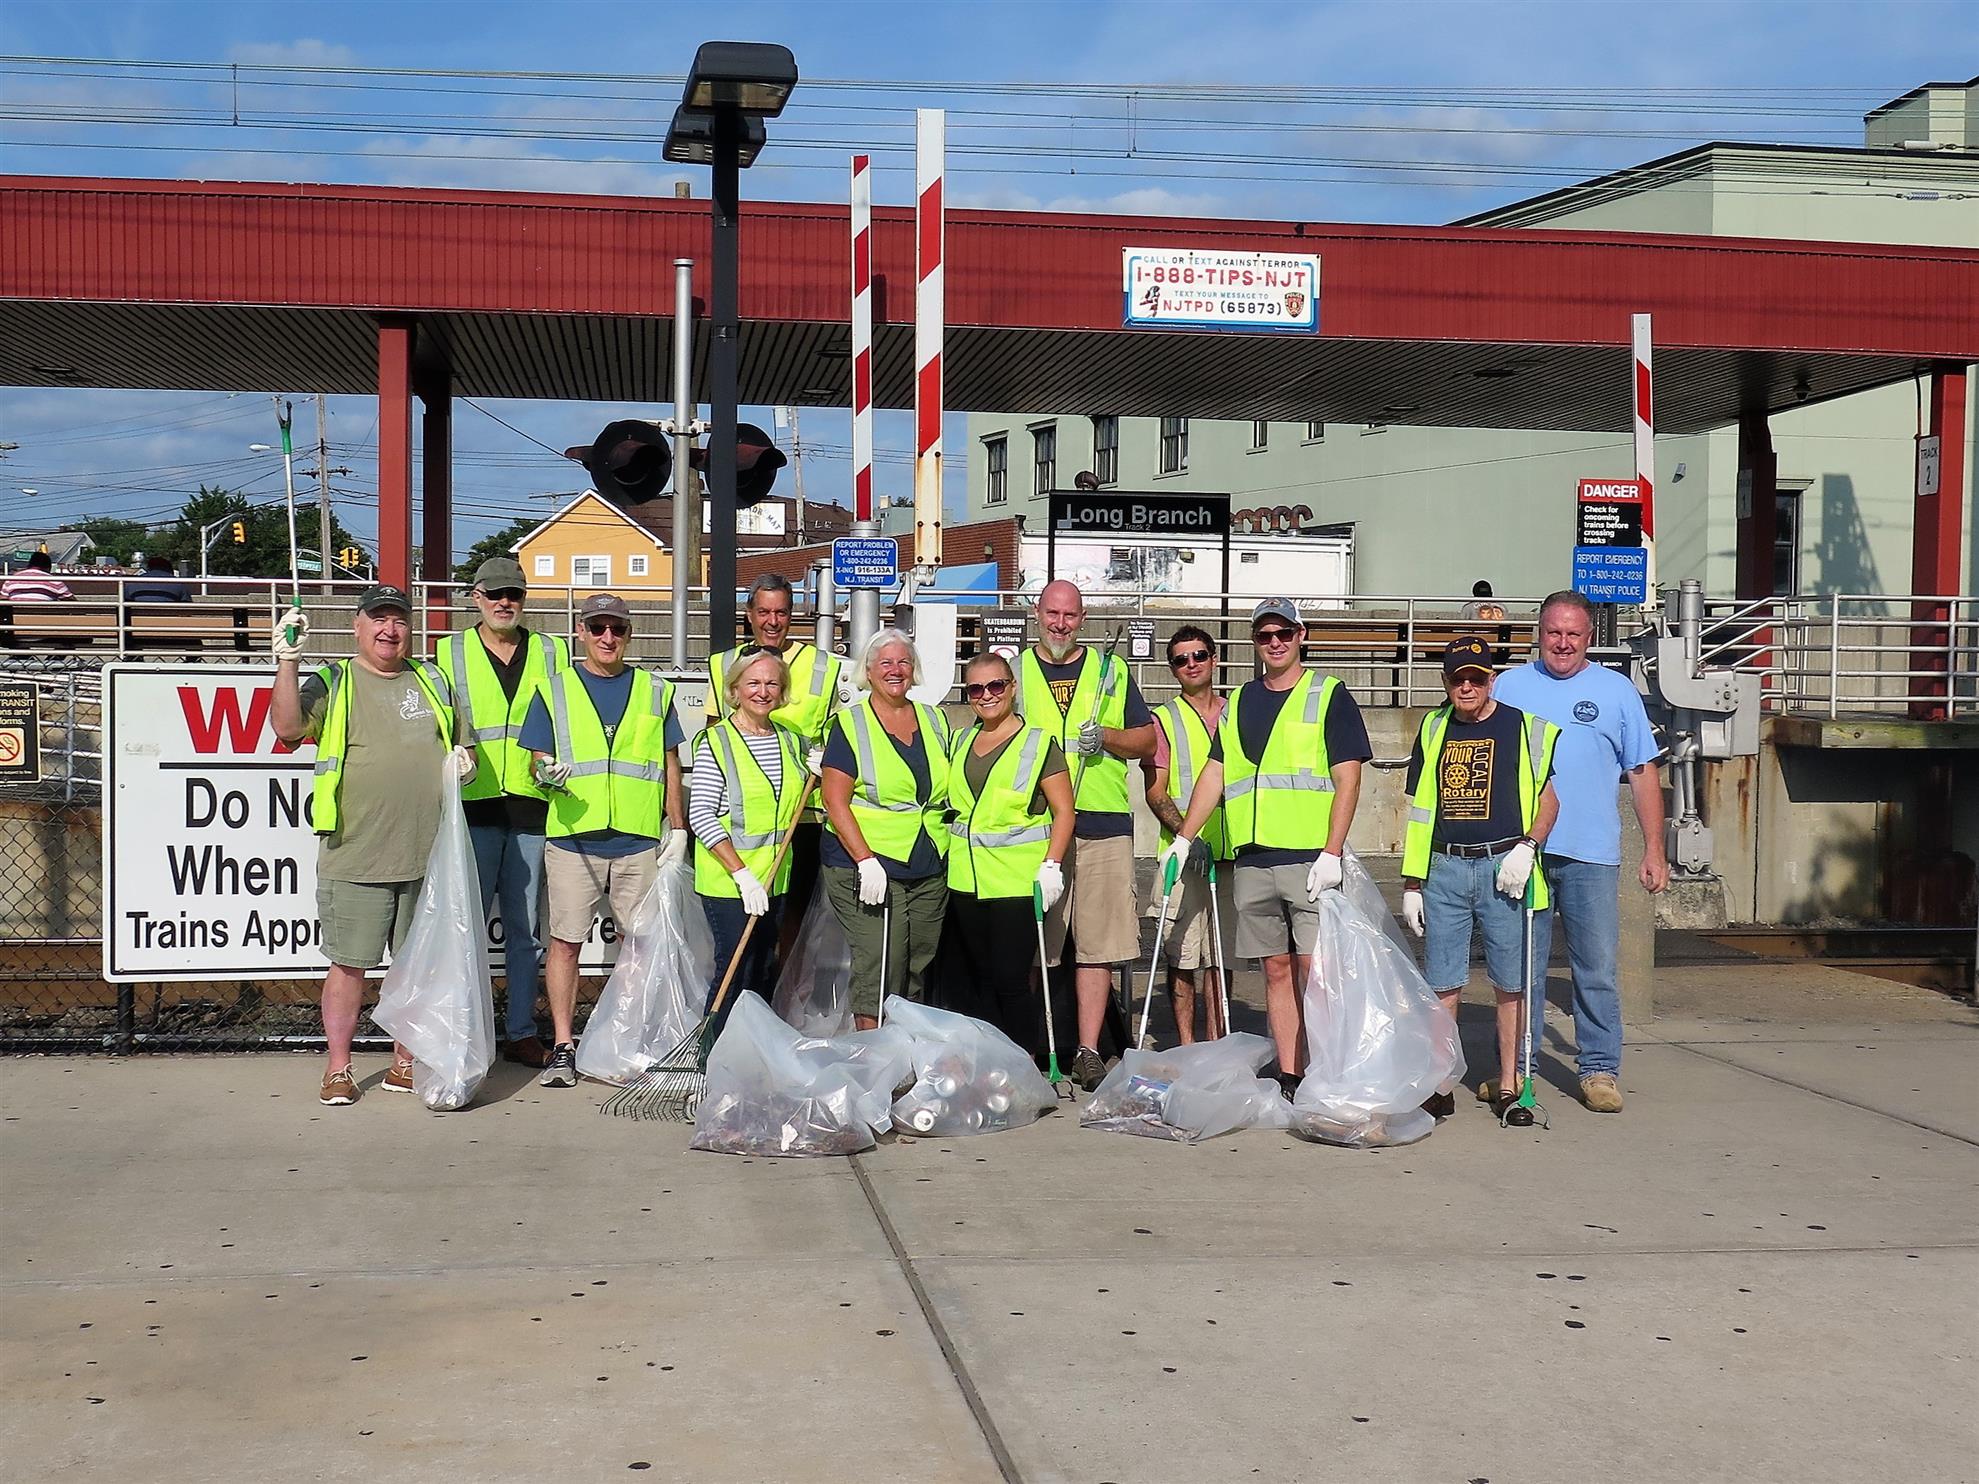 August 25, 2018 - Long Branch Train Station Clean-up